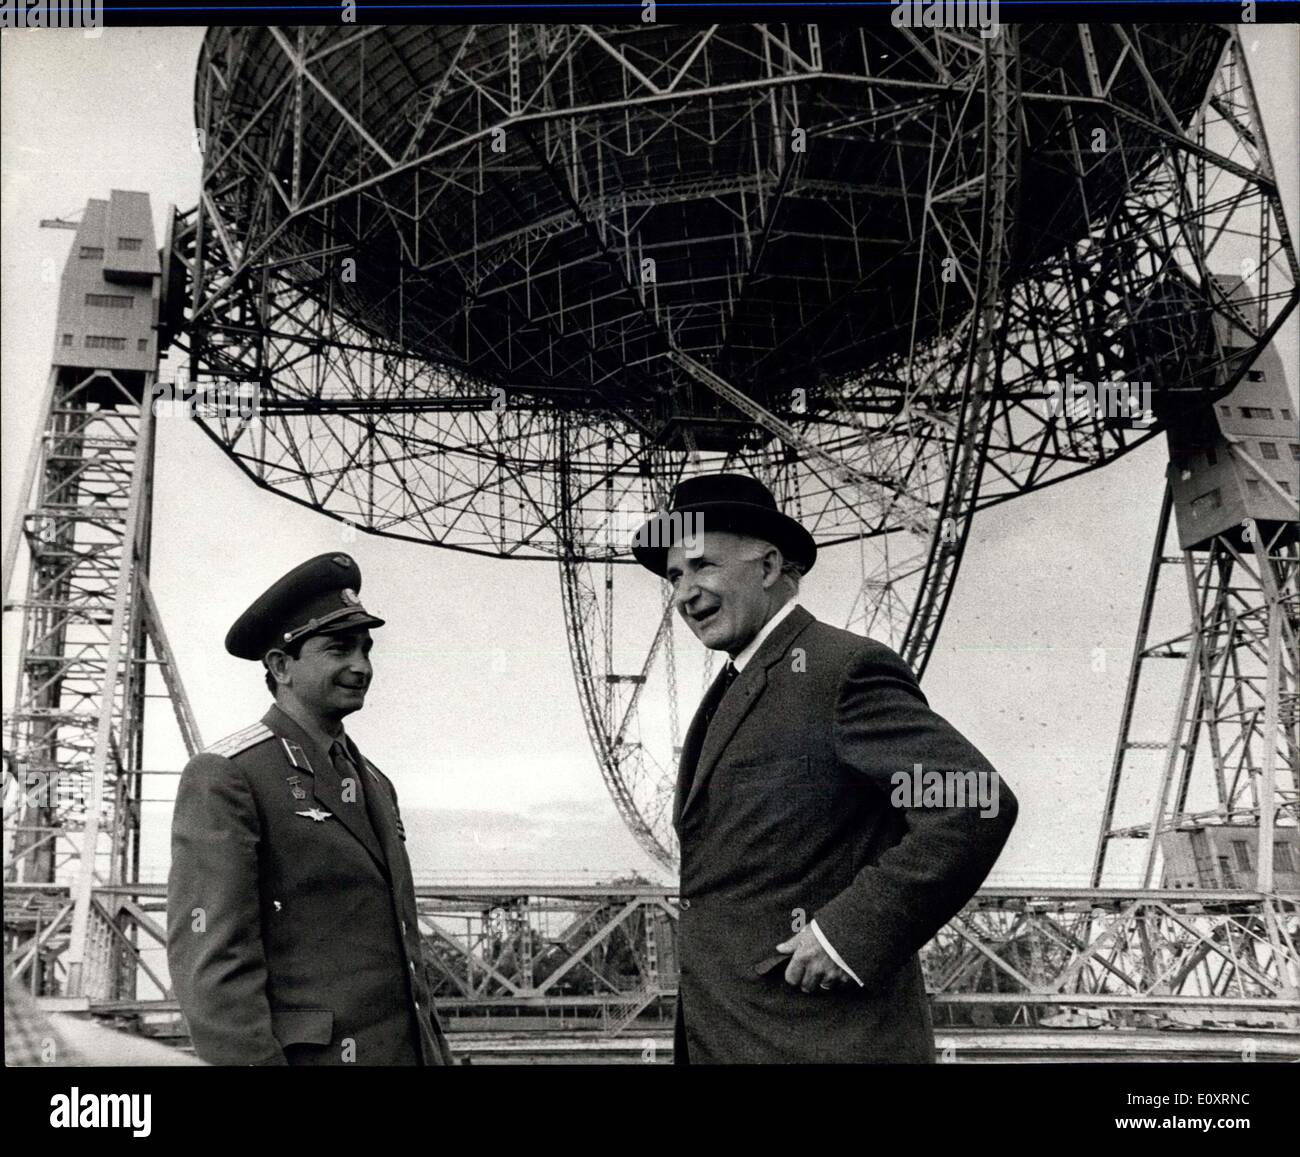 Oct. 26, 1967 - Soviet Spacemen sees Britain's giant Radio Telescope at Jodrell Bank : Soviet Cosmonaut Lt. Col. Valery Bykovsky who is currently on a seven day visit to this country, today paid a visit to Jodrell Bank, where he saw Britain's giant radio telescope. In 1963 Bykovsky was launched into later by the Soviet woman cosmonaut Valentina Tereshkova in Vostok 6. Photo shows Soviet cosmonaut Lieut. Col. Valery Bykovsky is seen with Sir Bernard Lovell during his visit to Jodrell Bank. Stock Photo